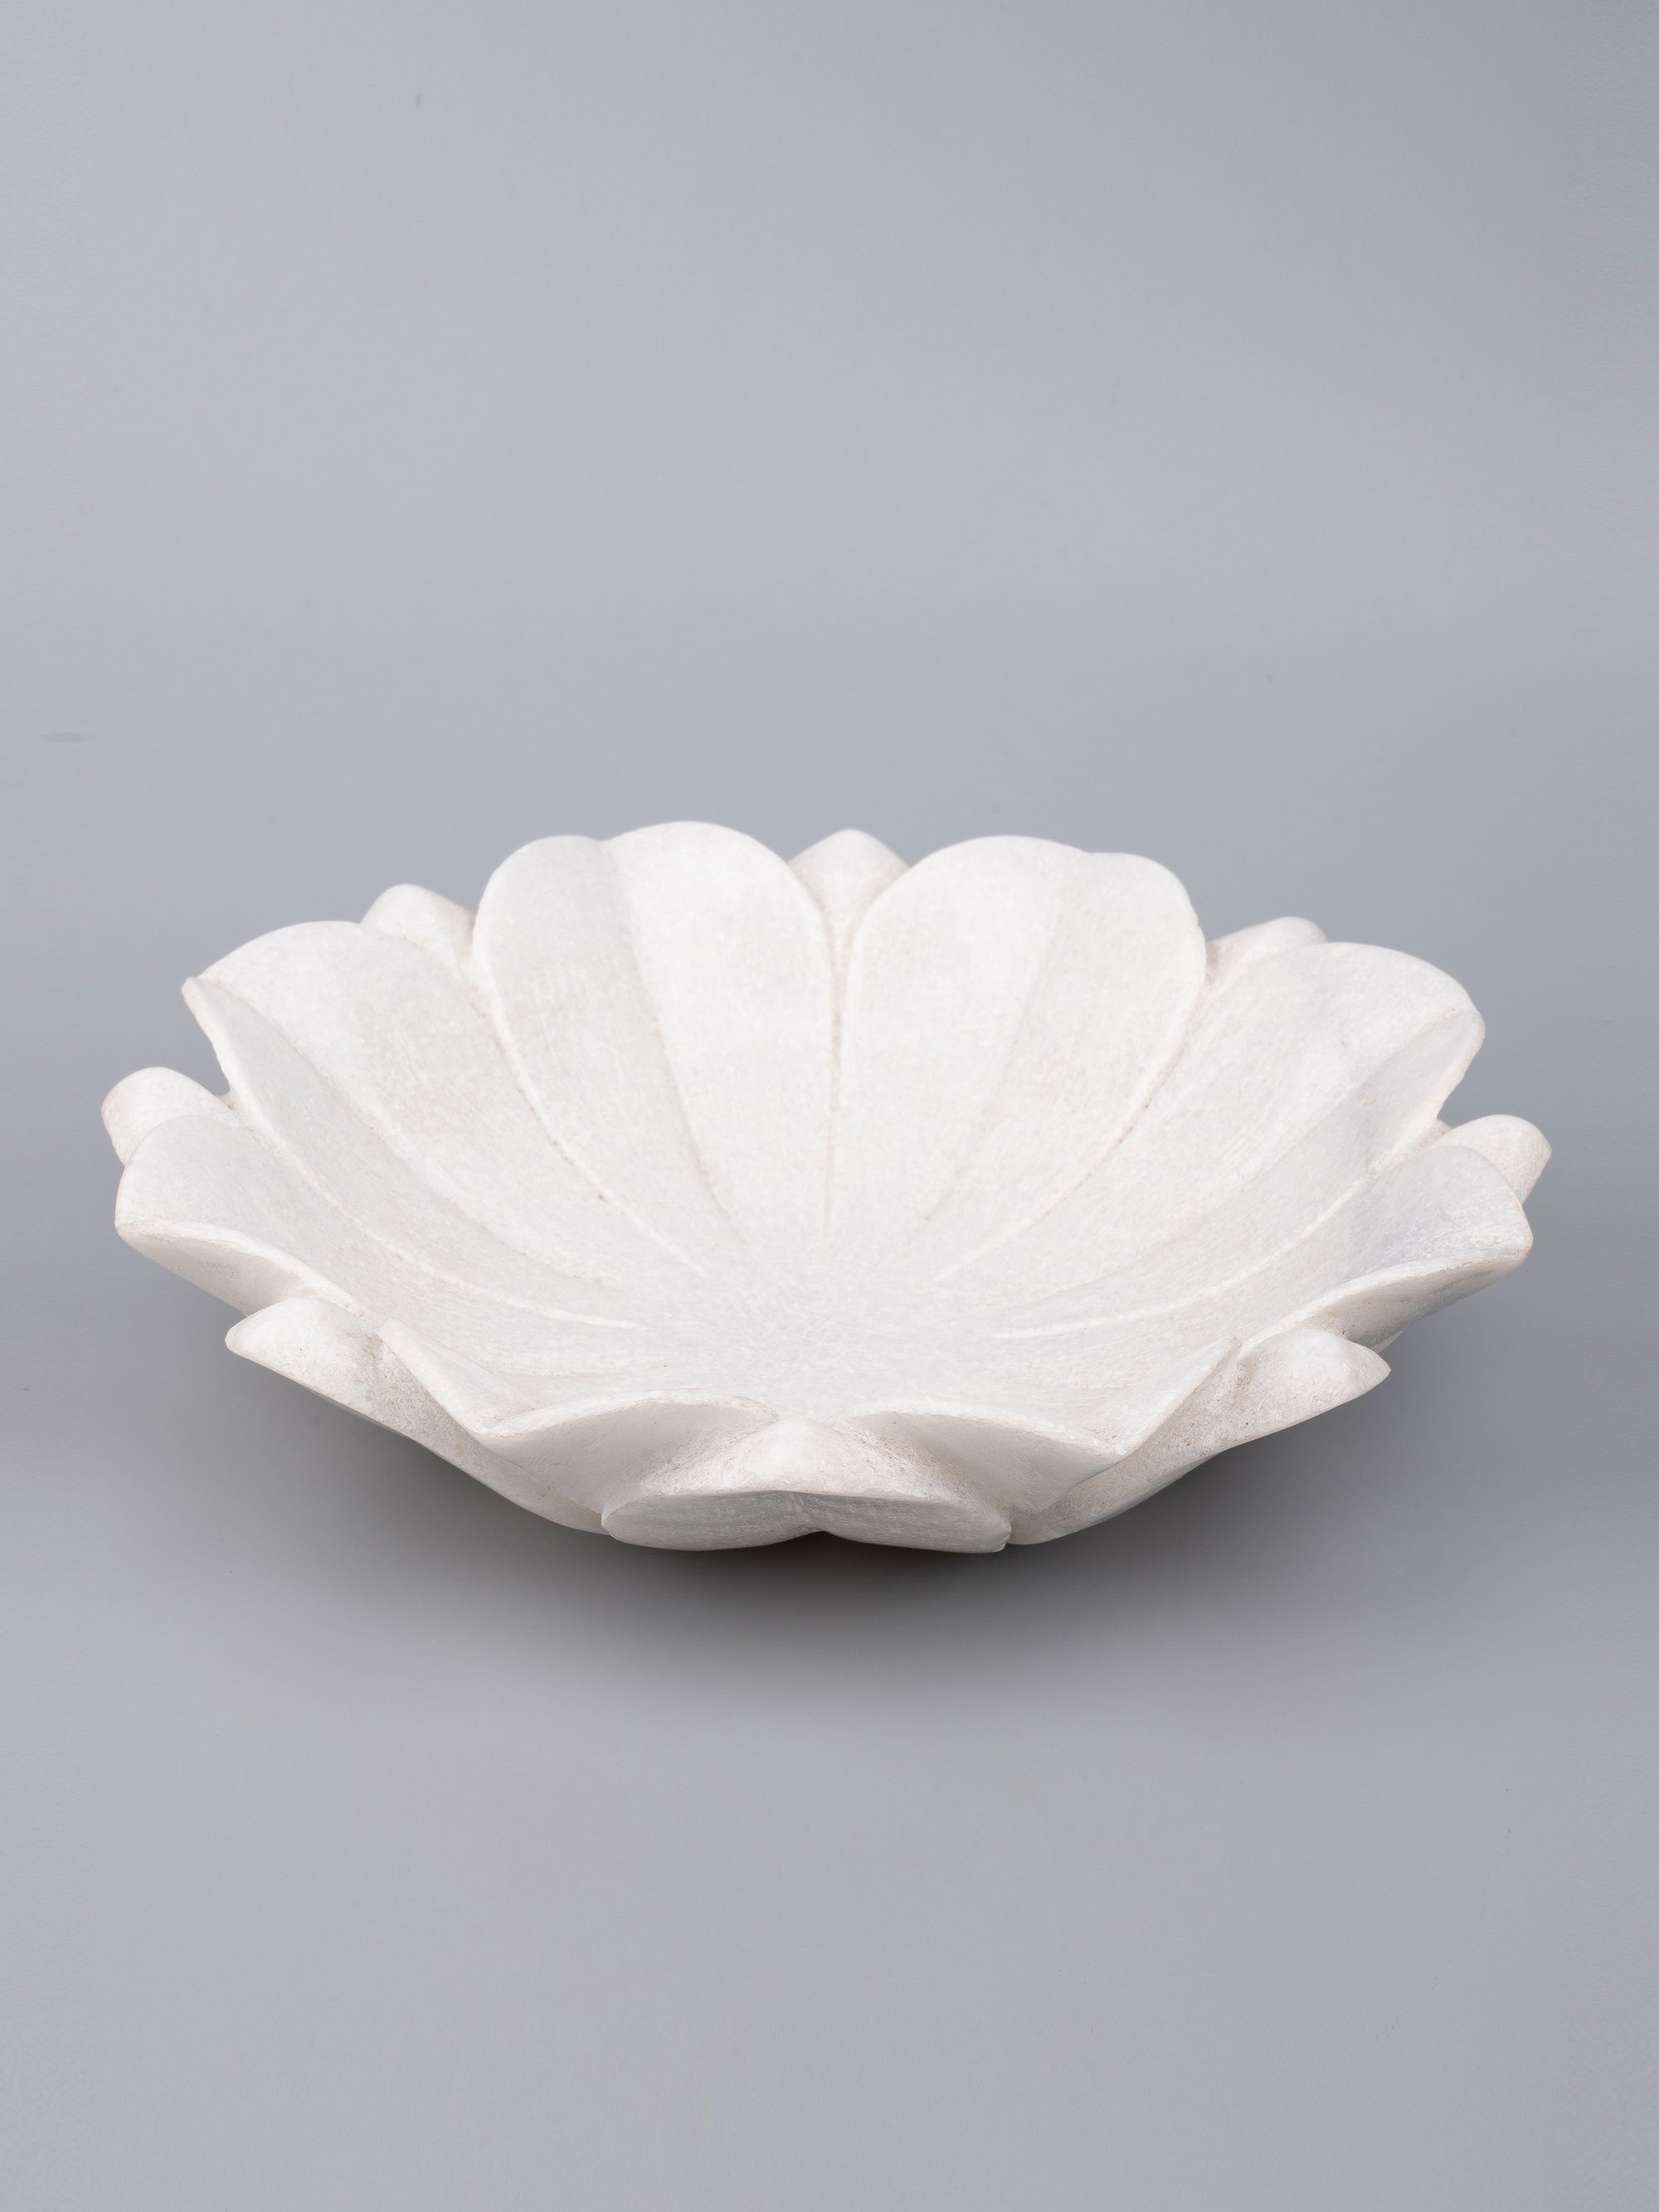 White marble Lotus plate with stand that can used as an individual flower also - The Heritage Artifacts